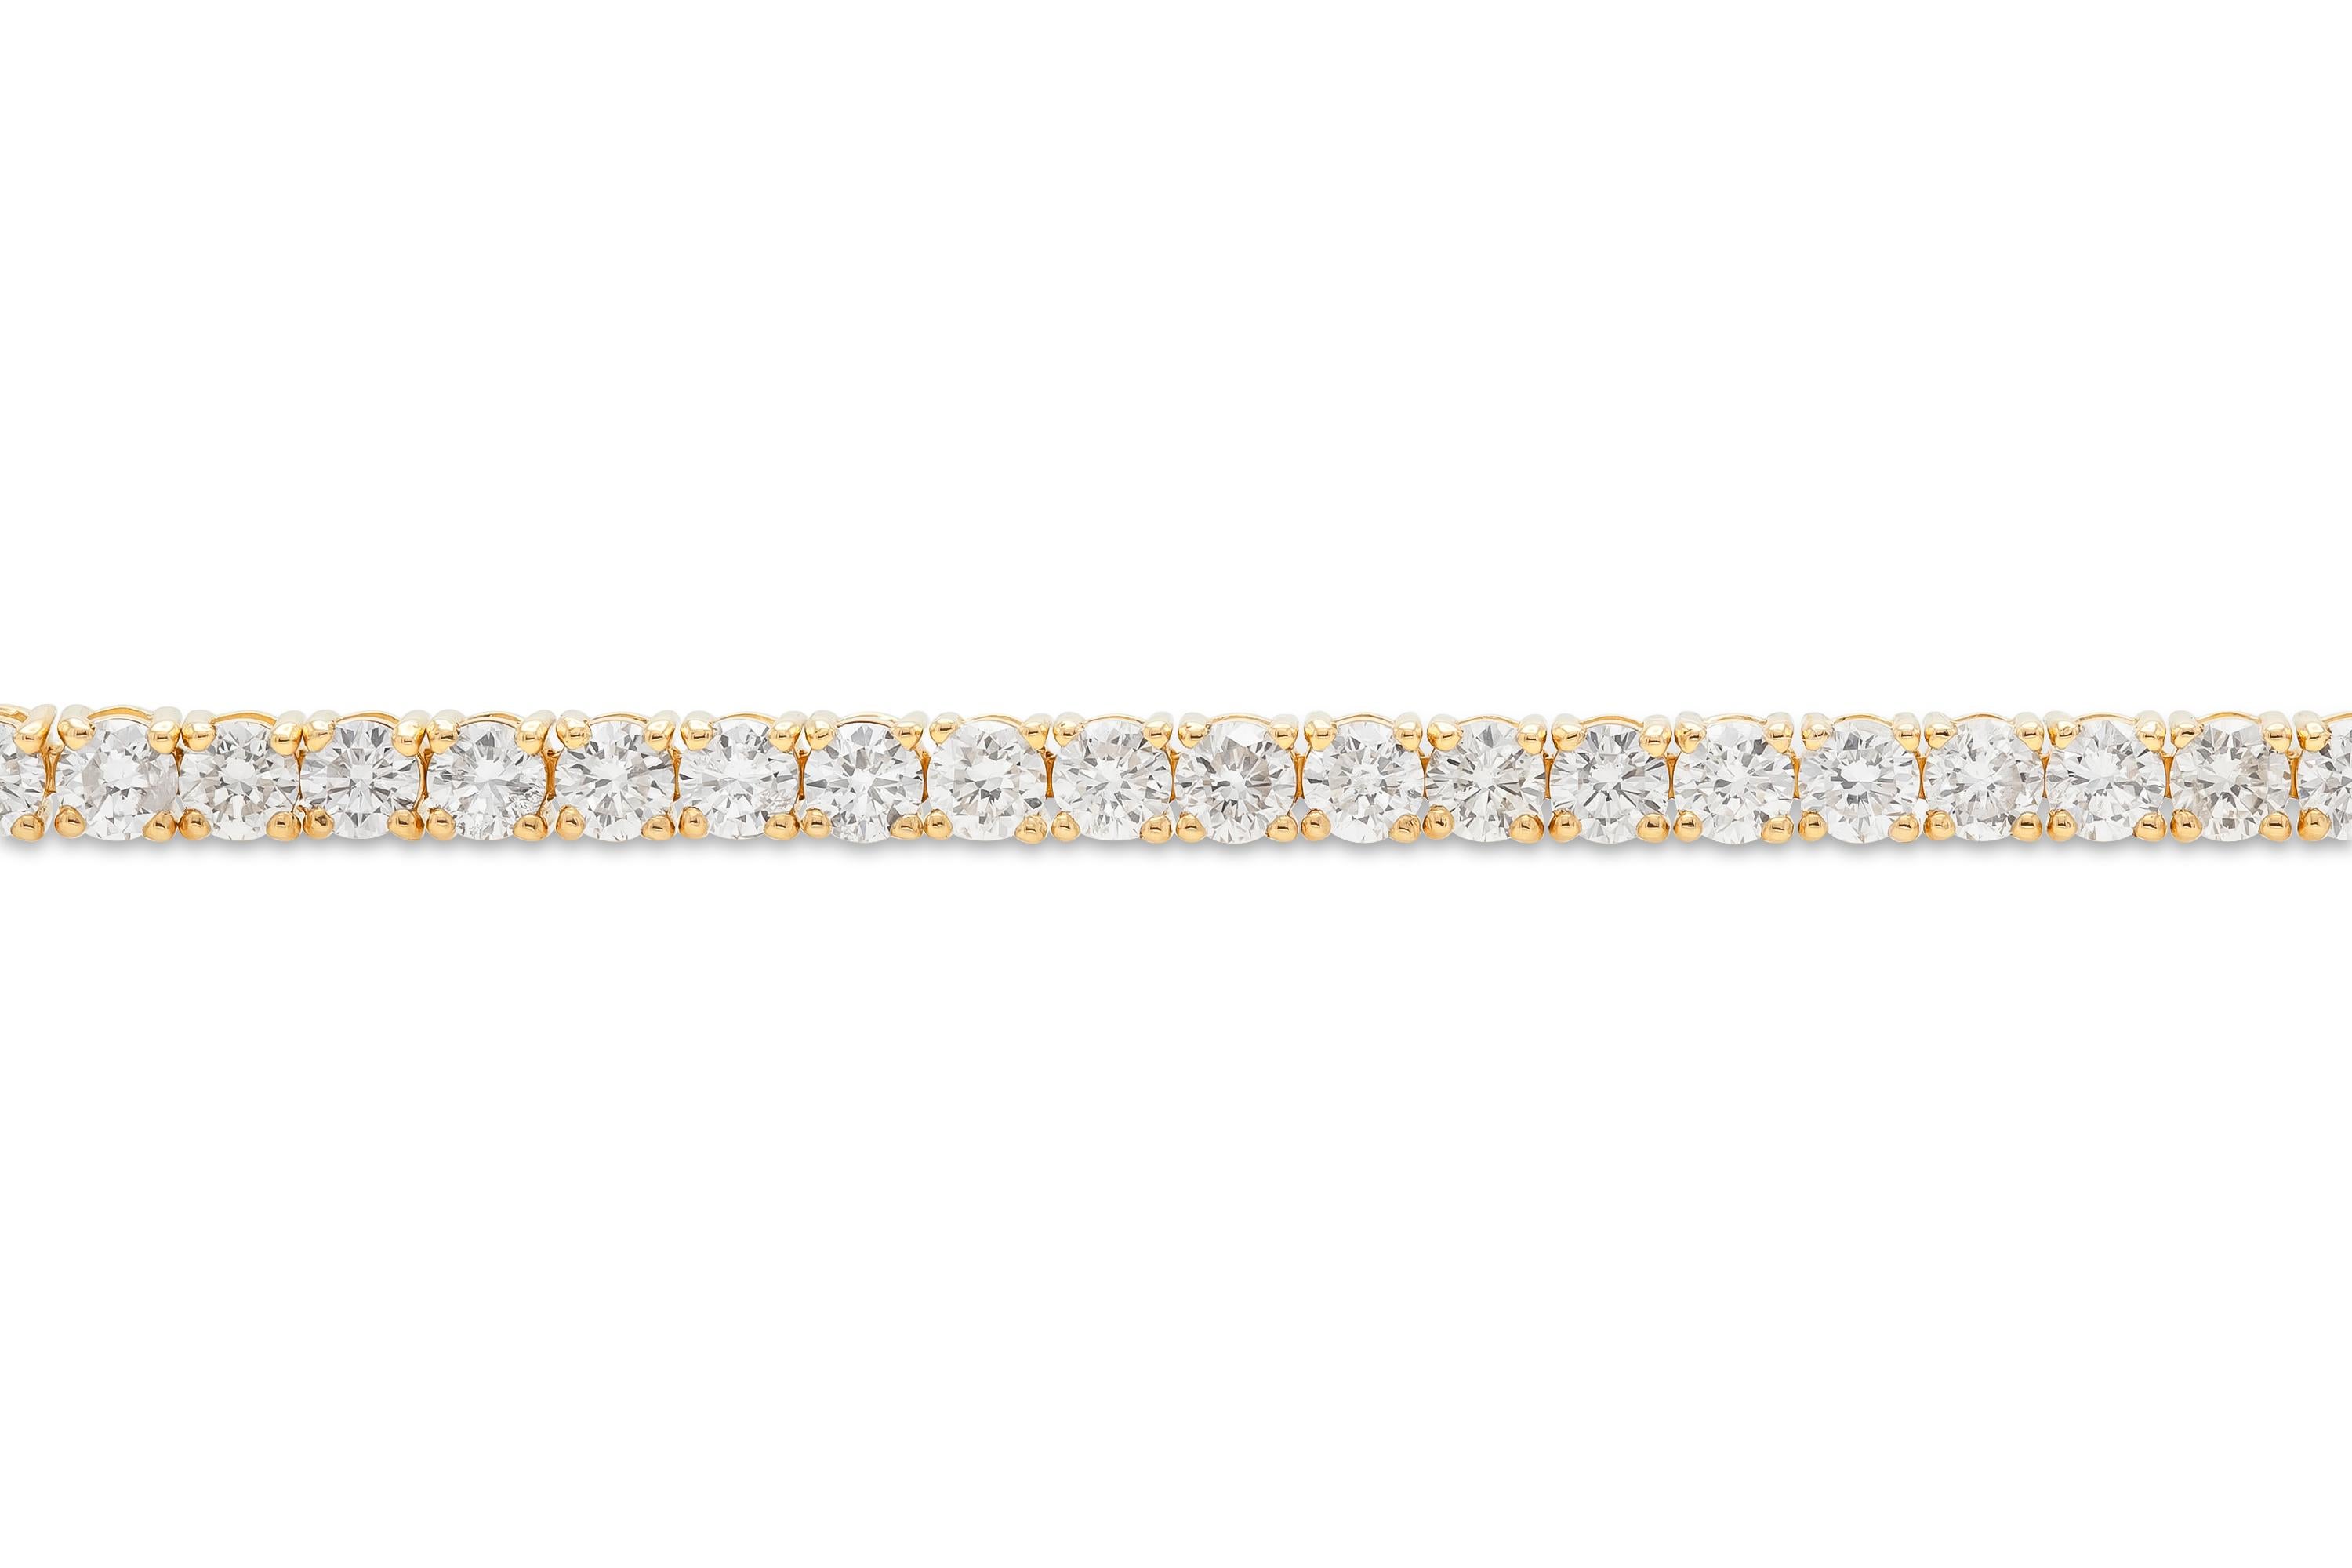 Finely crafted in 14k yellow gold with 64 round brilliant cut diamonds weighing a total of 4.62 carats.
4 prong-set.
7 inches long